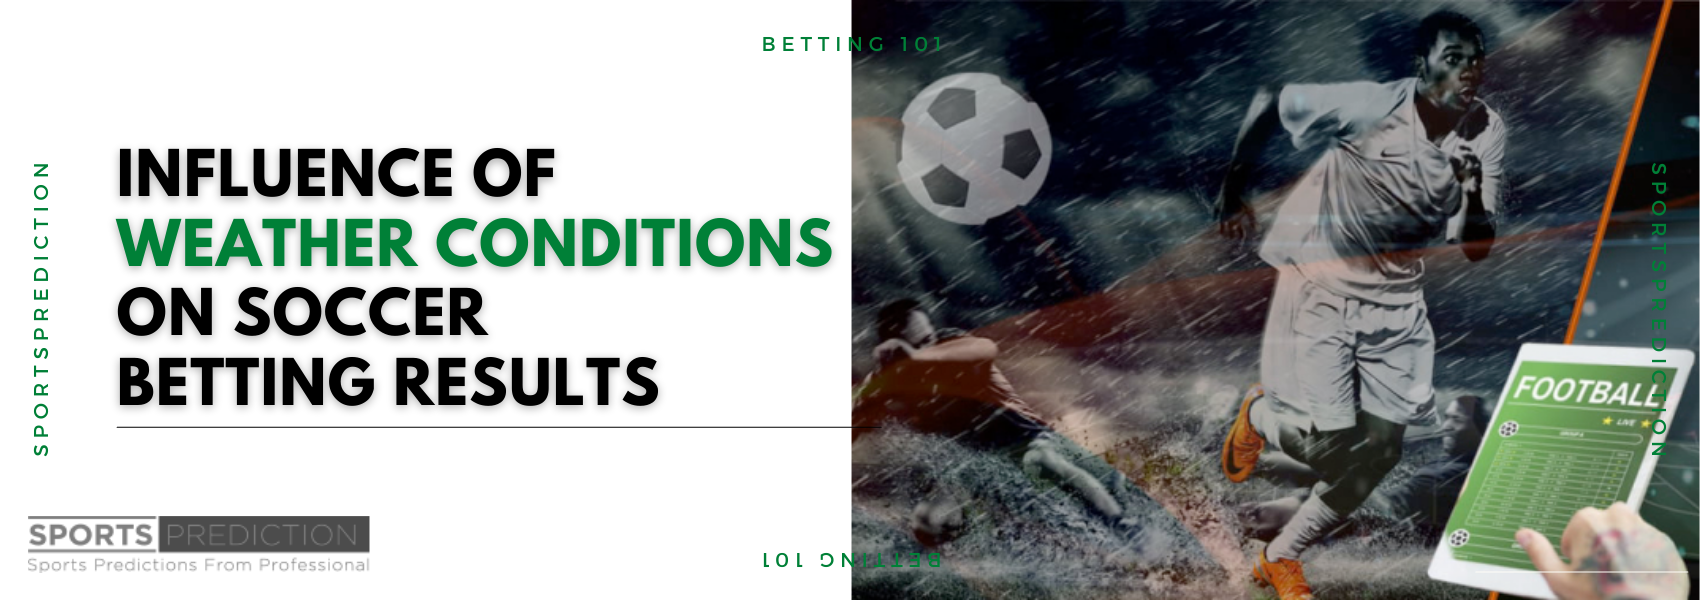 Sporting vs Roma Prediction and Betting Tips, 19th July